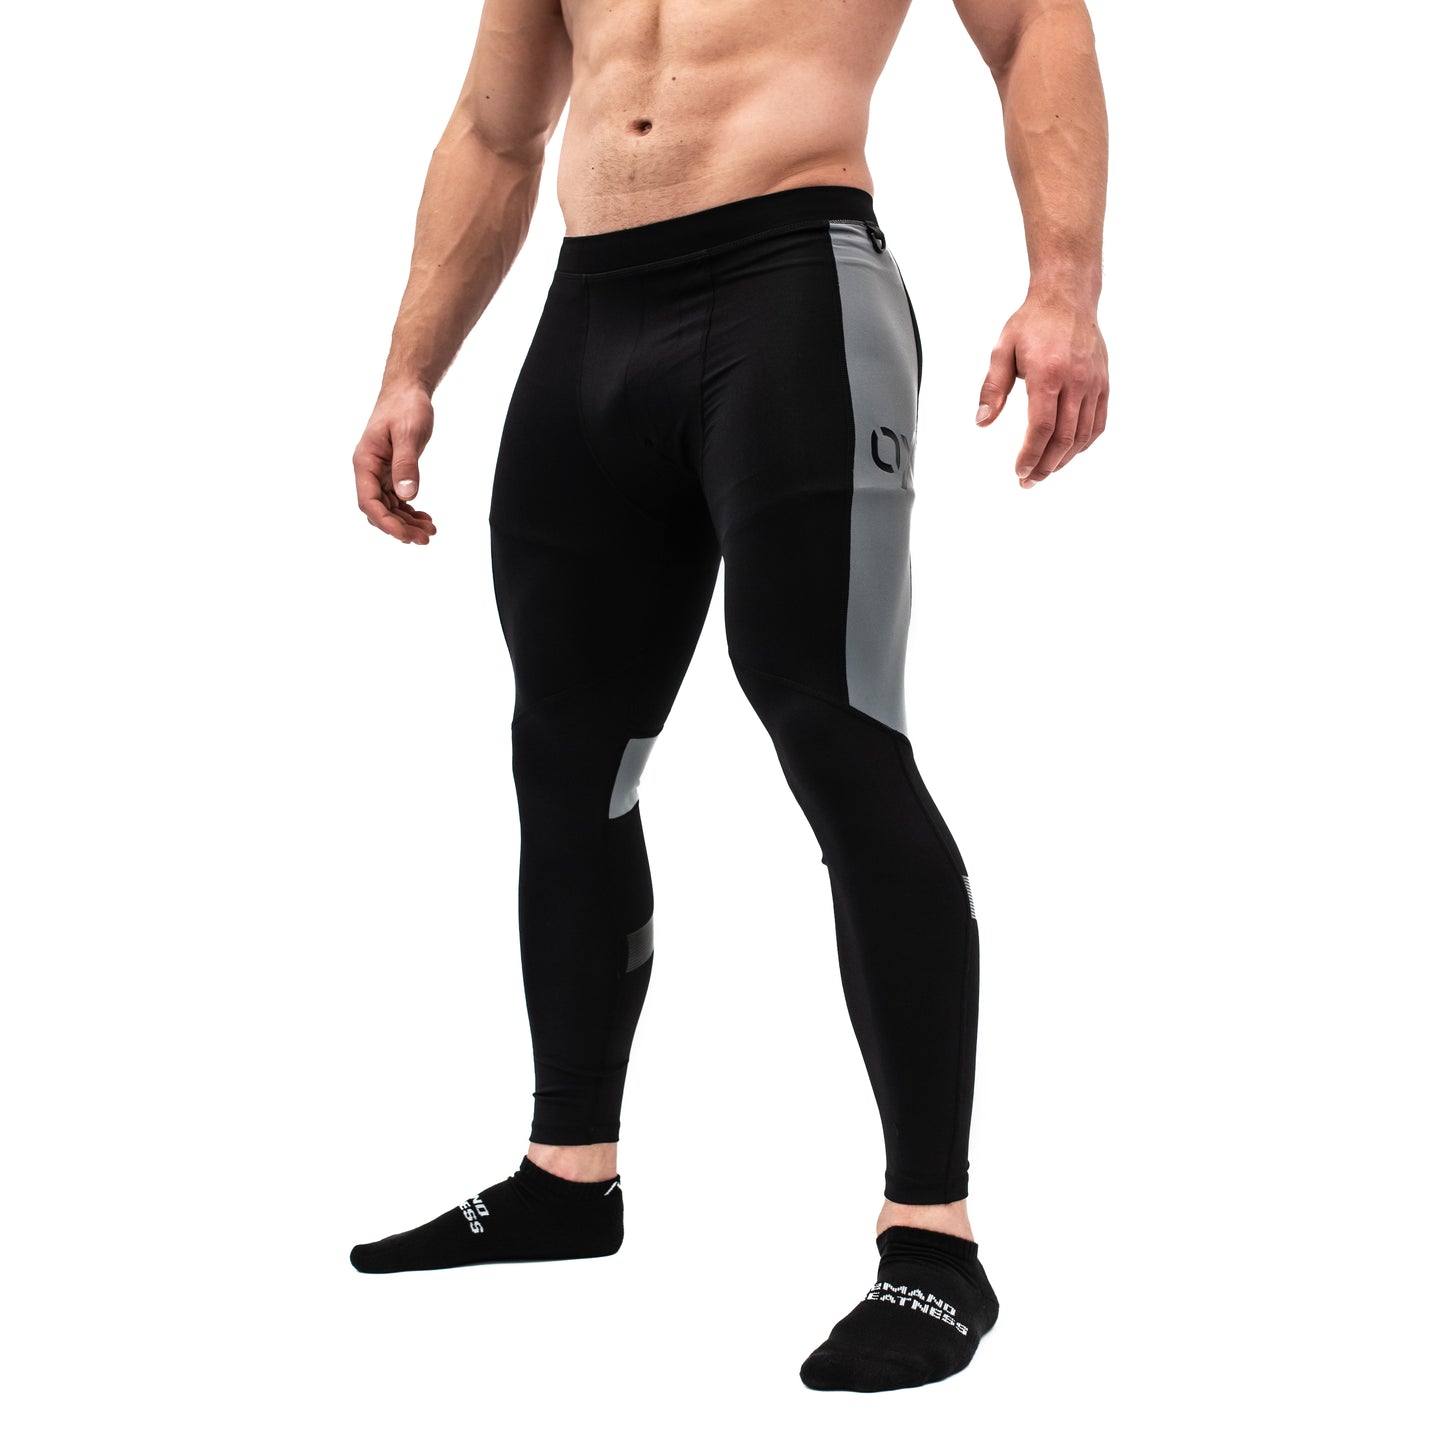 Your Ultimate Guide to Compression Wear | Men's Health